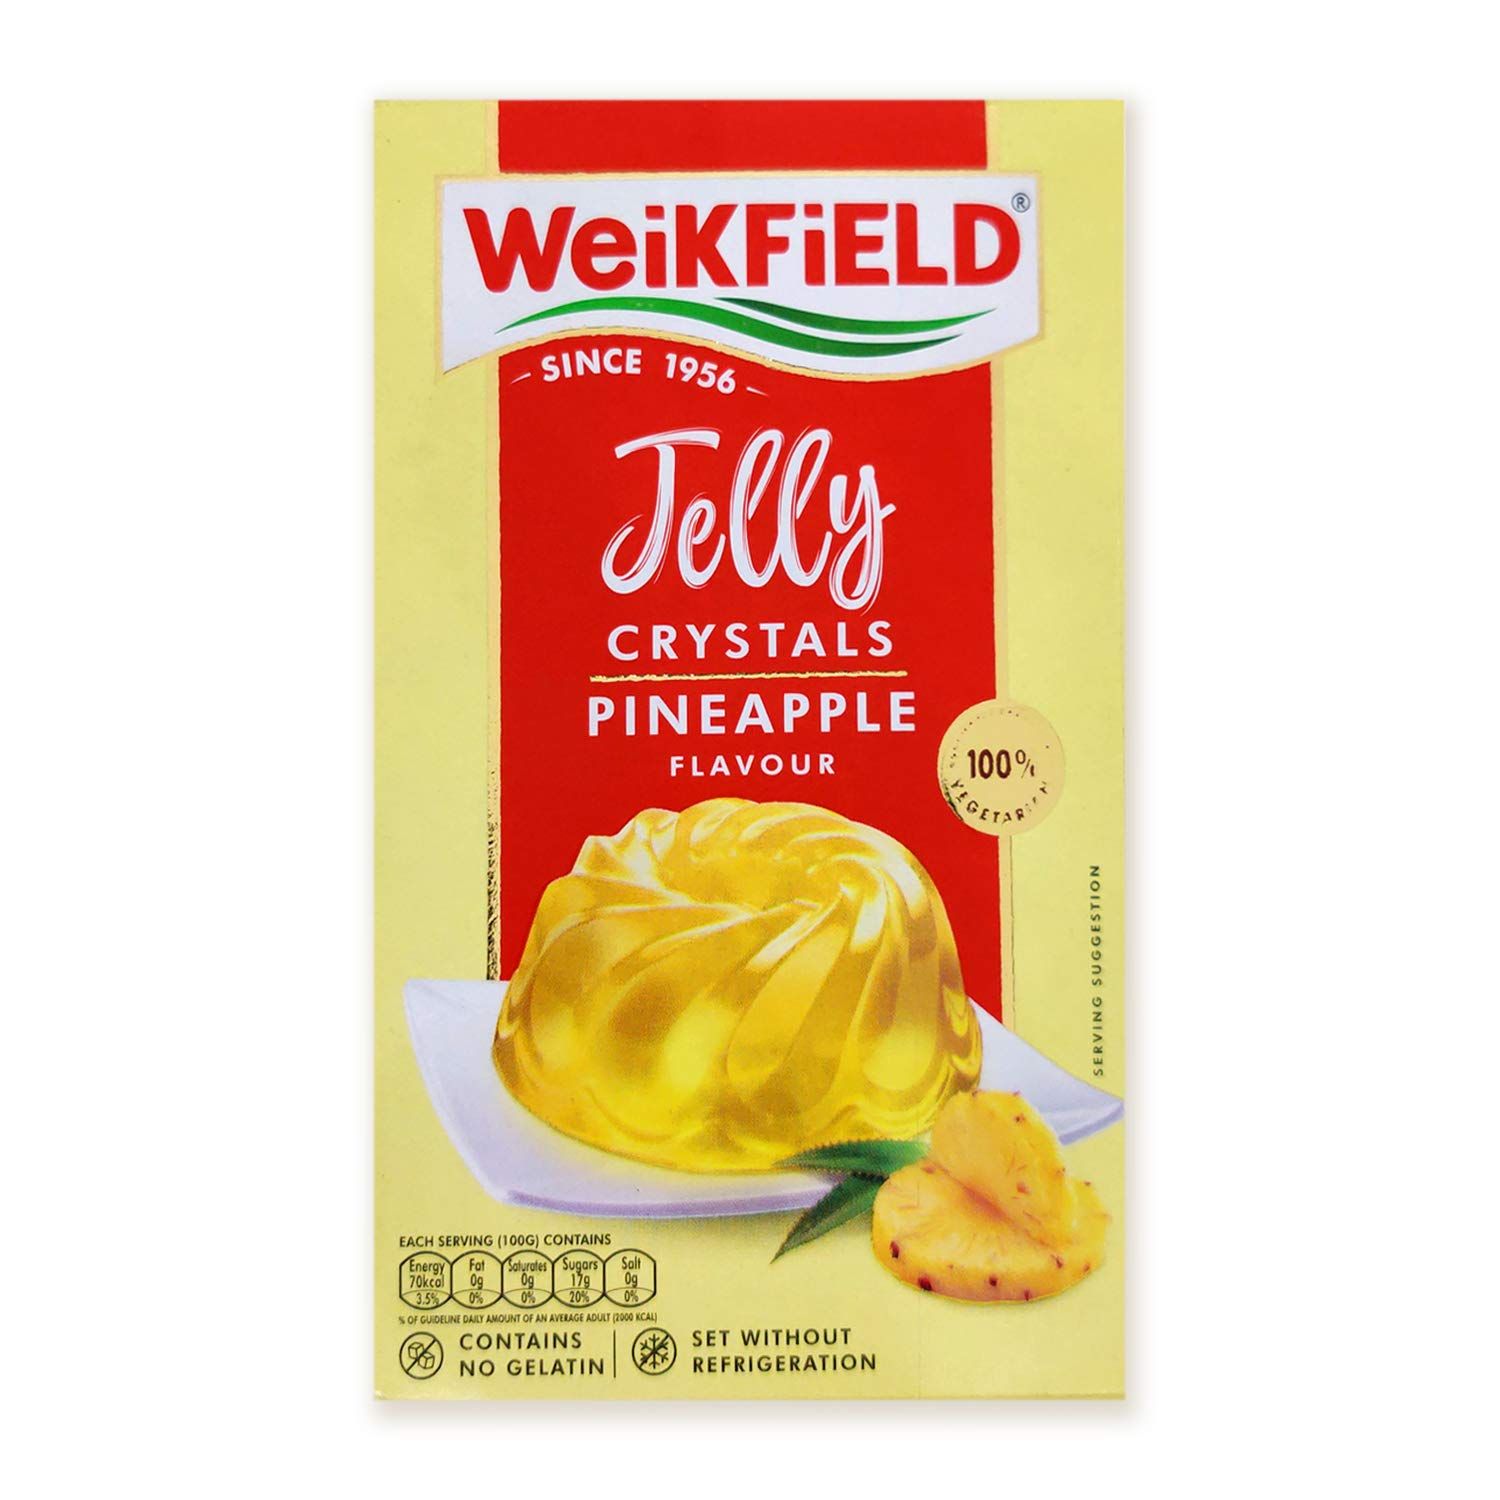 Weikfield Pineapple Jelly Crystal Image